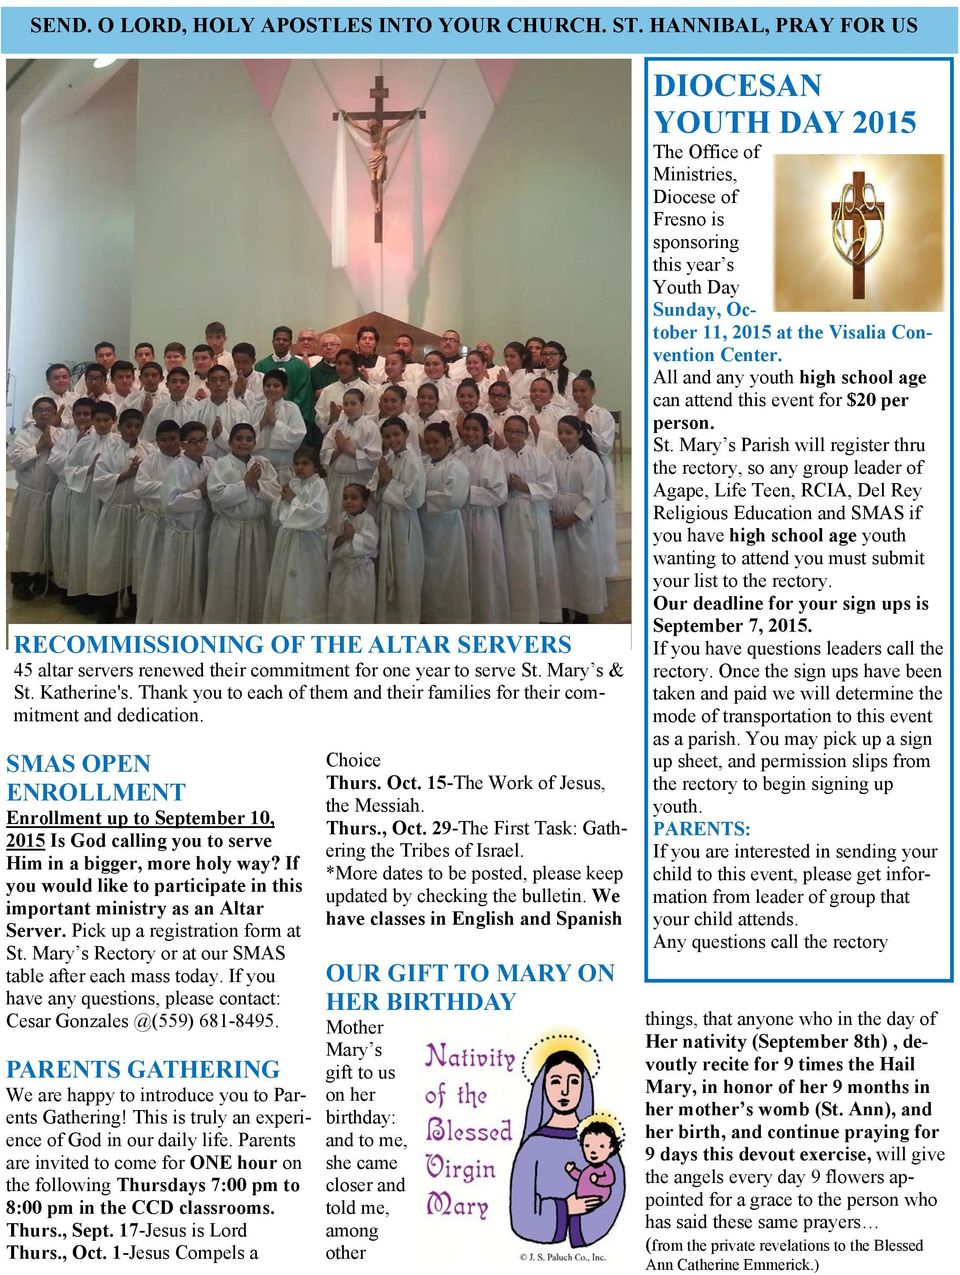 SMAS OPEN ENROLLMENT Enrollment up to September 10, 2015 Is God calling you to serve Him in a bigger, more holy way? If you would like to participate in this important ministry as an Altar Server.